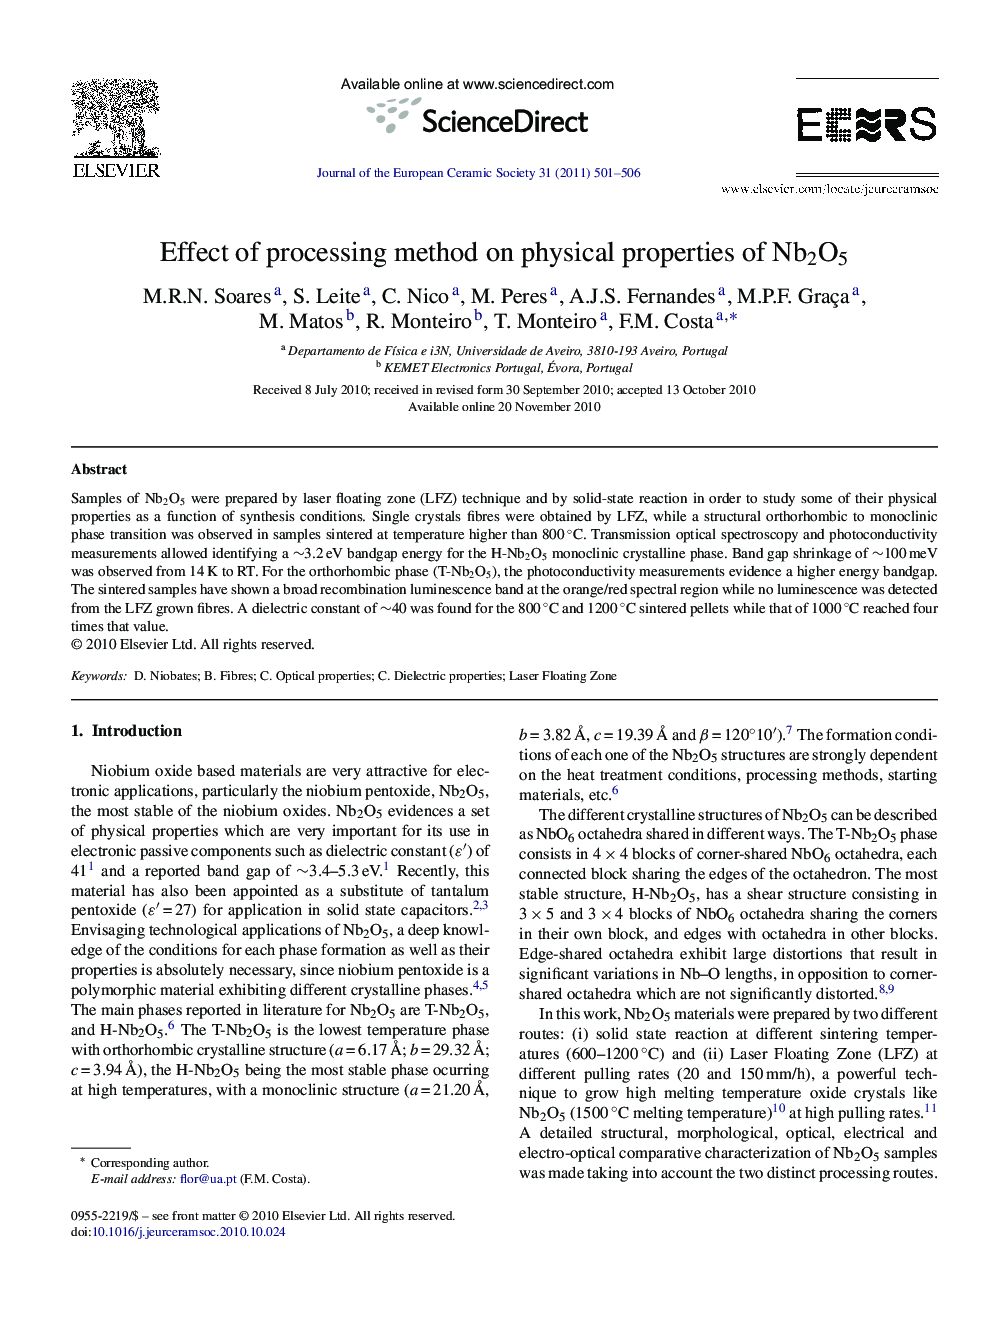 Effect of processing method on physical properties of Nb2O5